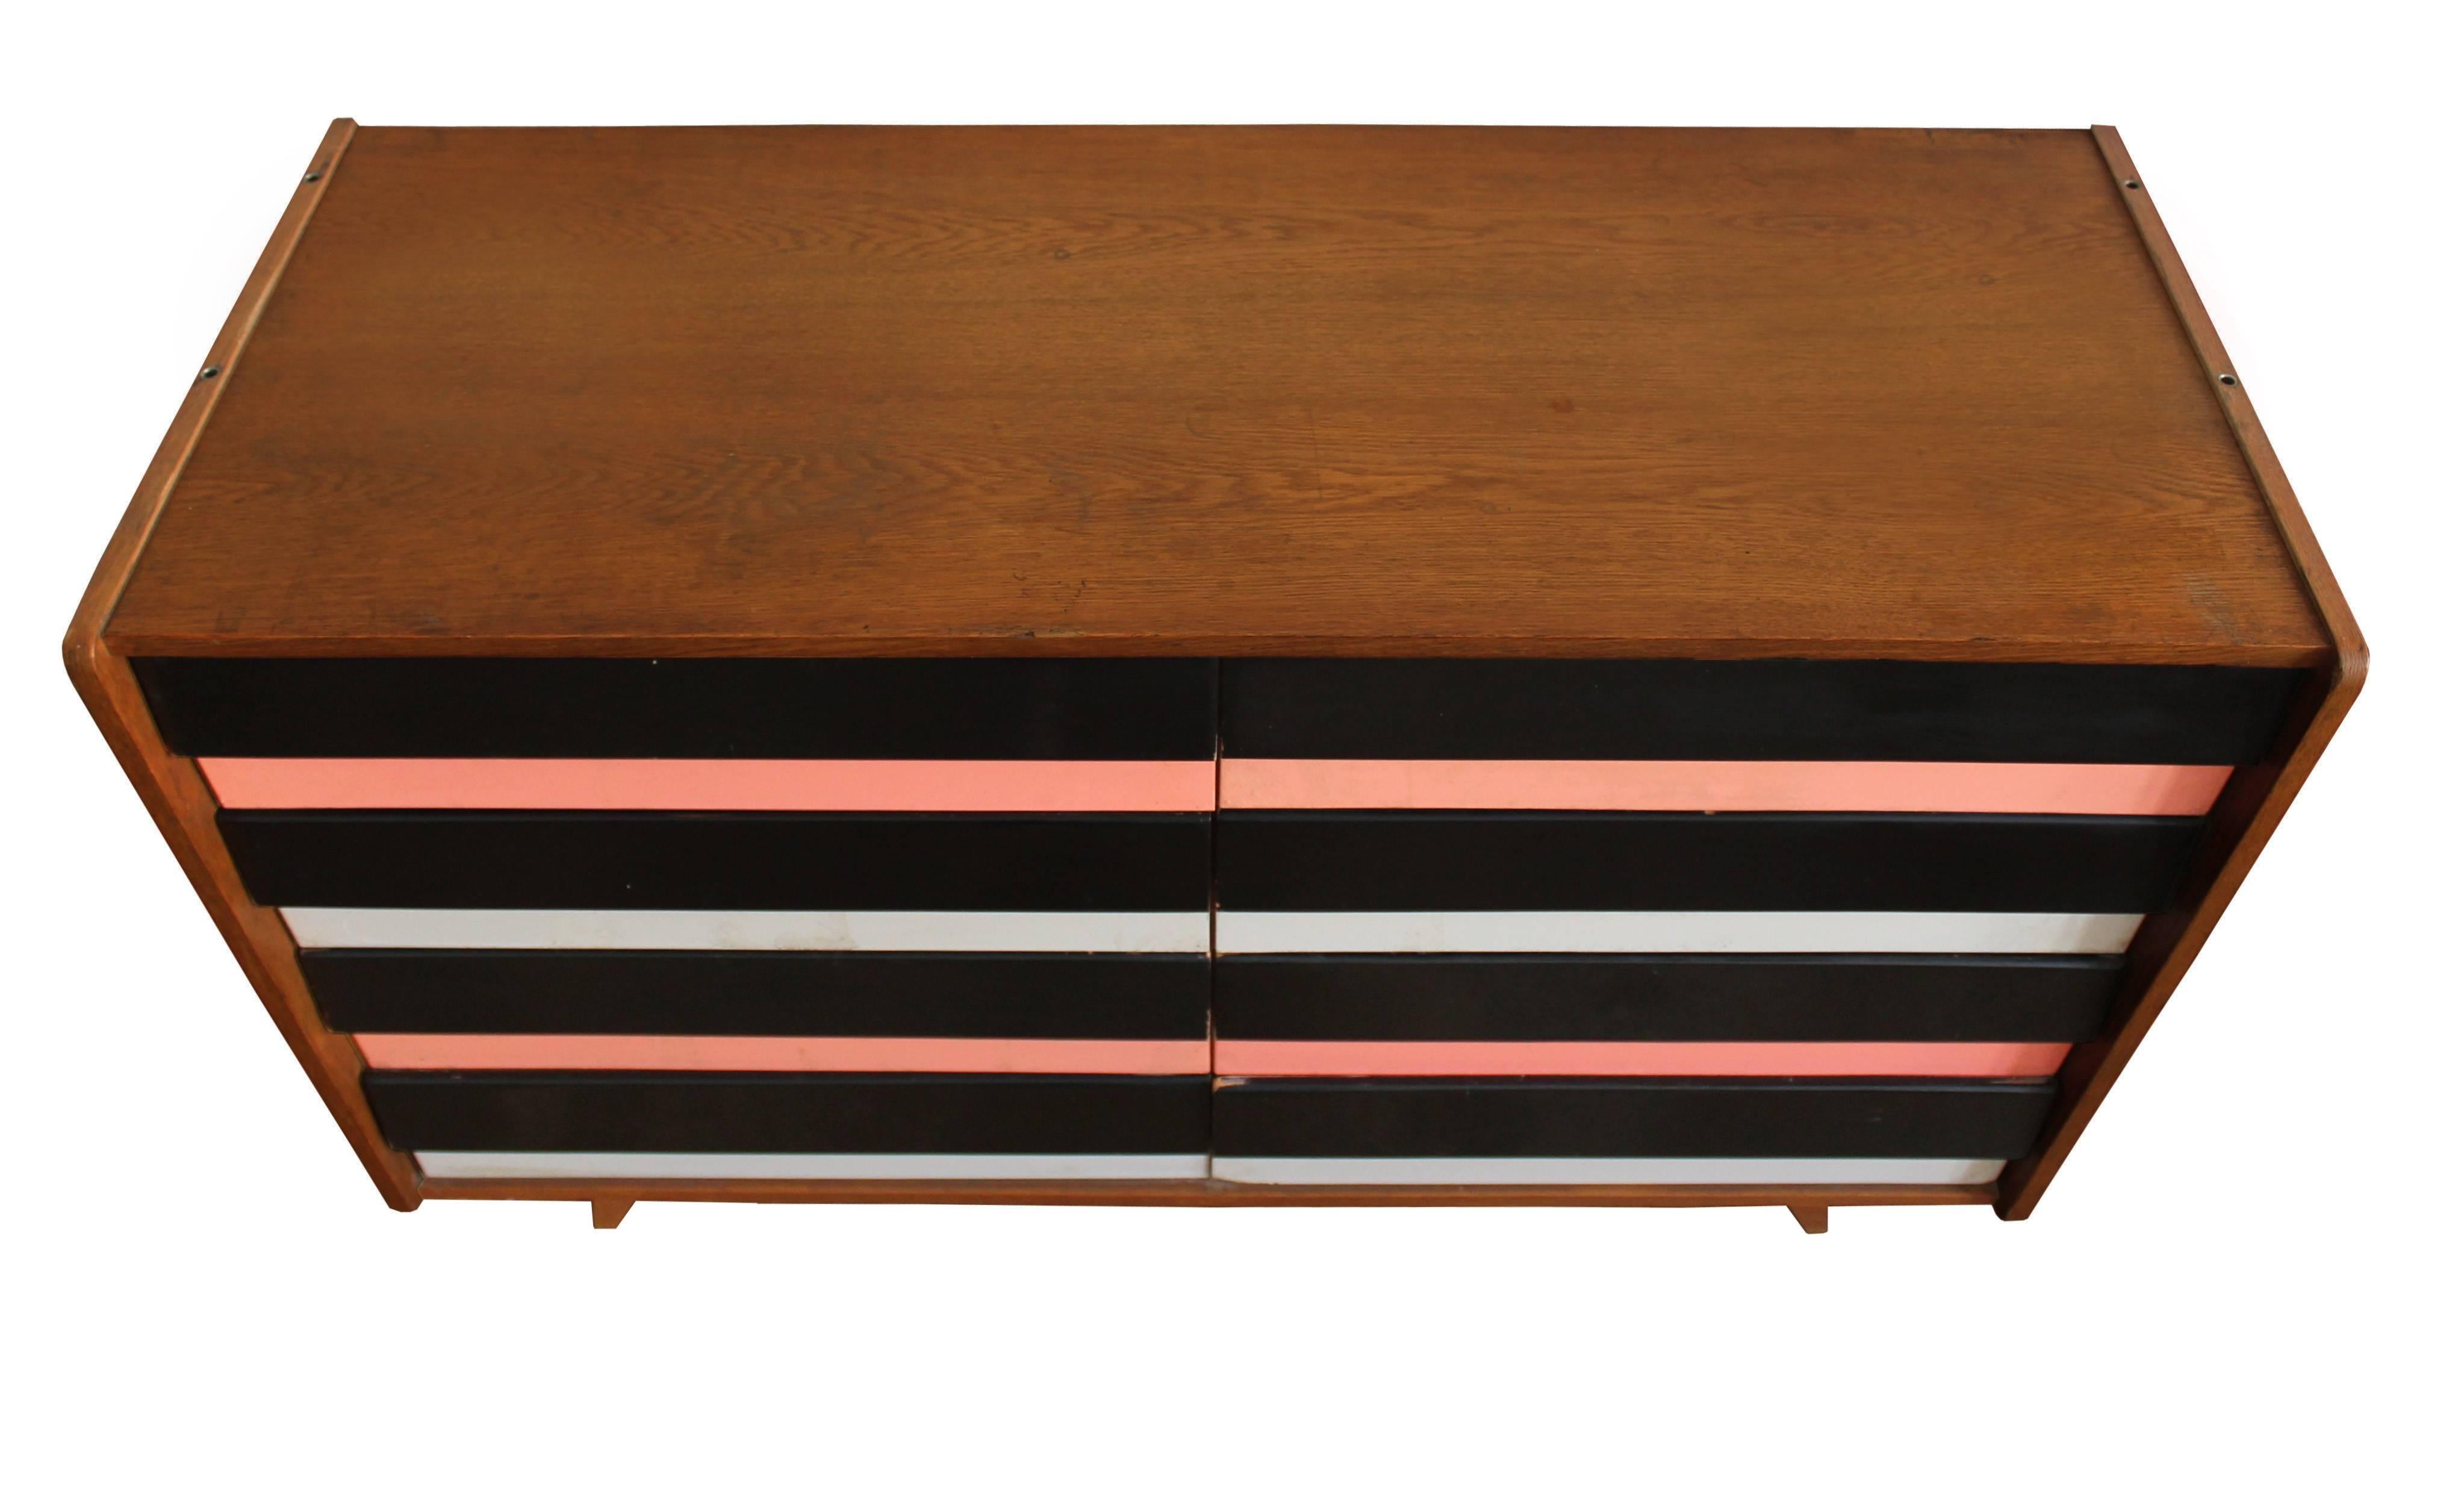 The U-453 sideboard with black, pink and white Formica drawers, was designed by legendary Czech furniture designer Jiri Jiroutek, and was part of the popular U collection manufactured by Interier Praha in the 1960s Czechoslovakia. This piece